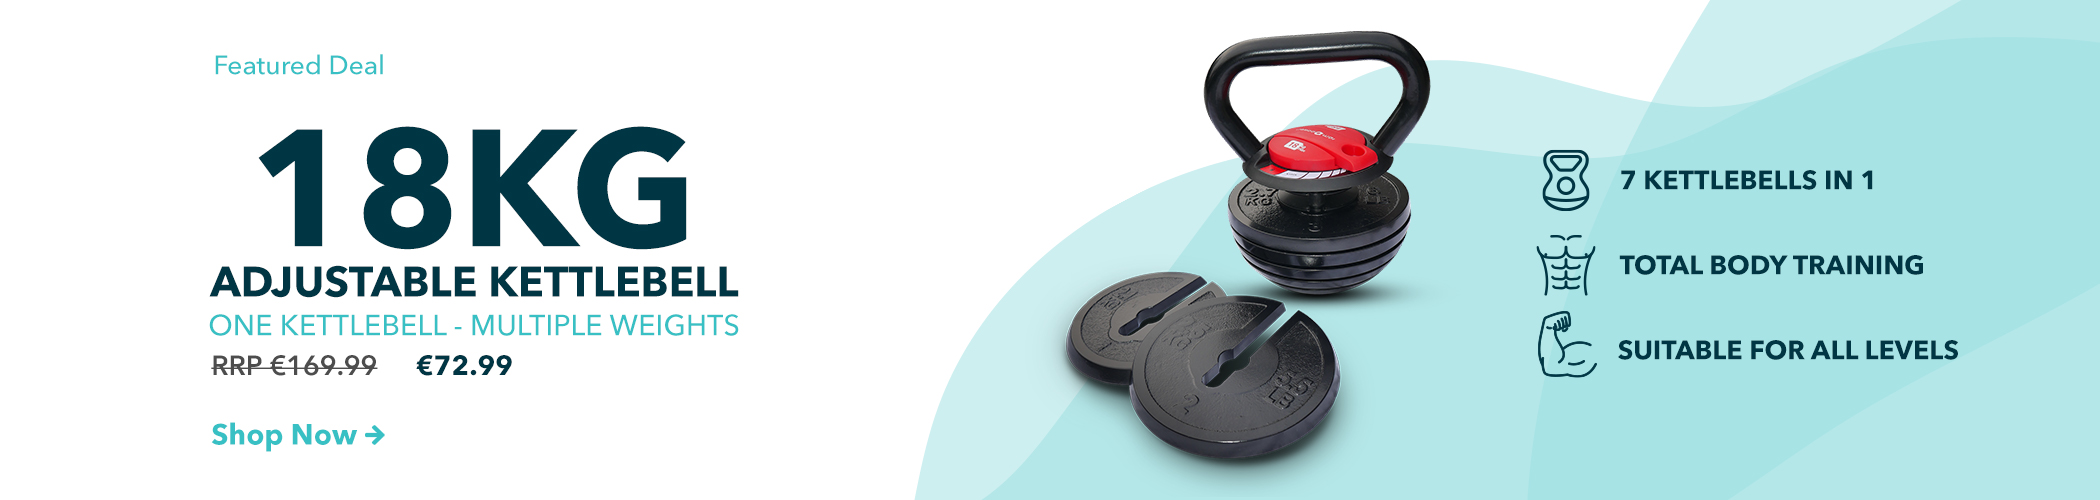 Adjustable kettlebell 18KG with multiple weights category banner for desktop with pricing